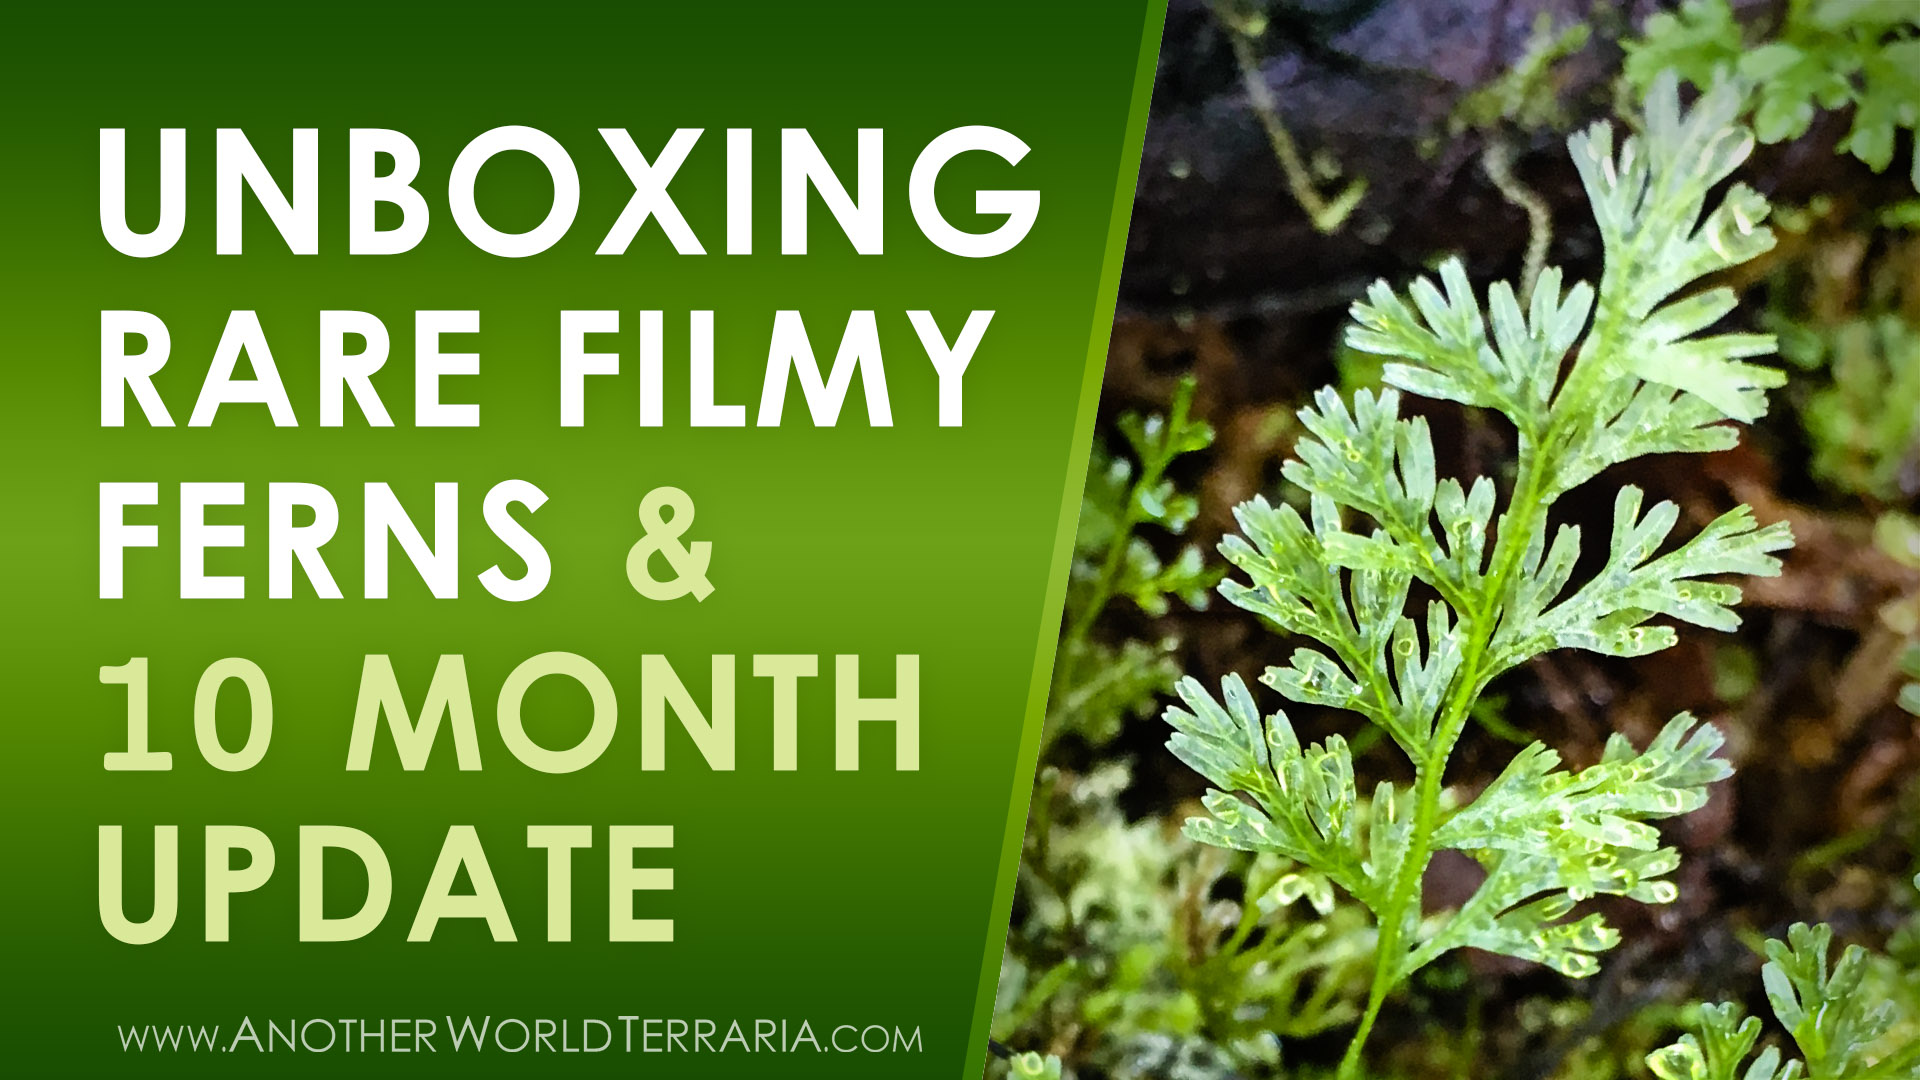 Unboxing rare filmy ferns plus 10 month growth update